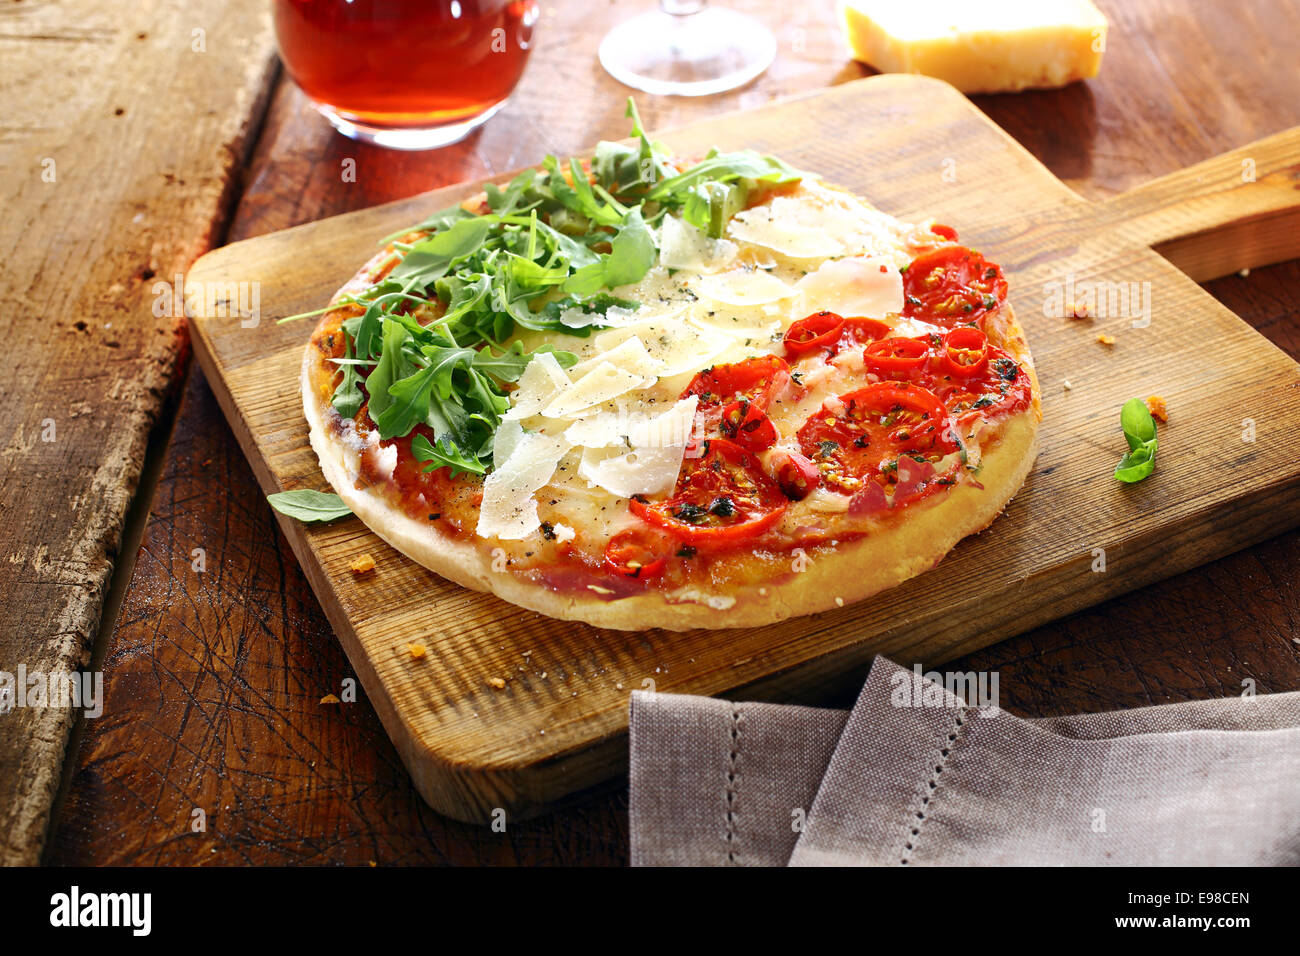 Colourful Italian pizza in the national colours topped with fresh green rocket leaves, white shavings of cheese and red tomatoes in three stripes standing on a wooden board on an old rustic table Stock Photo